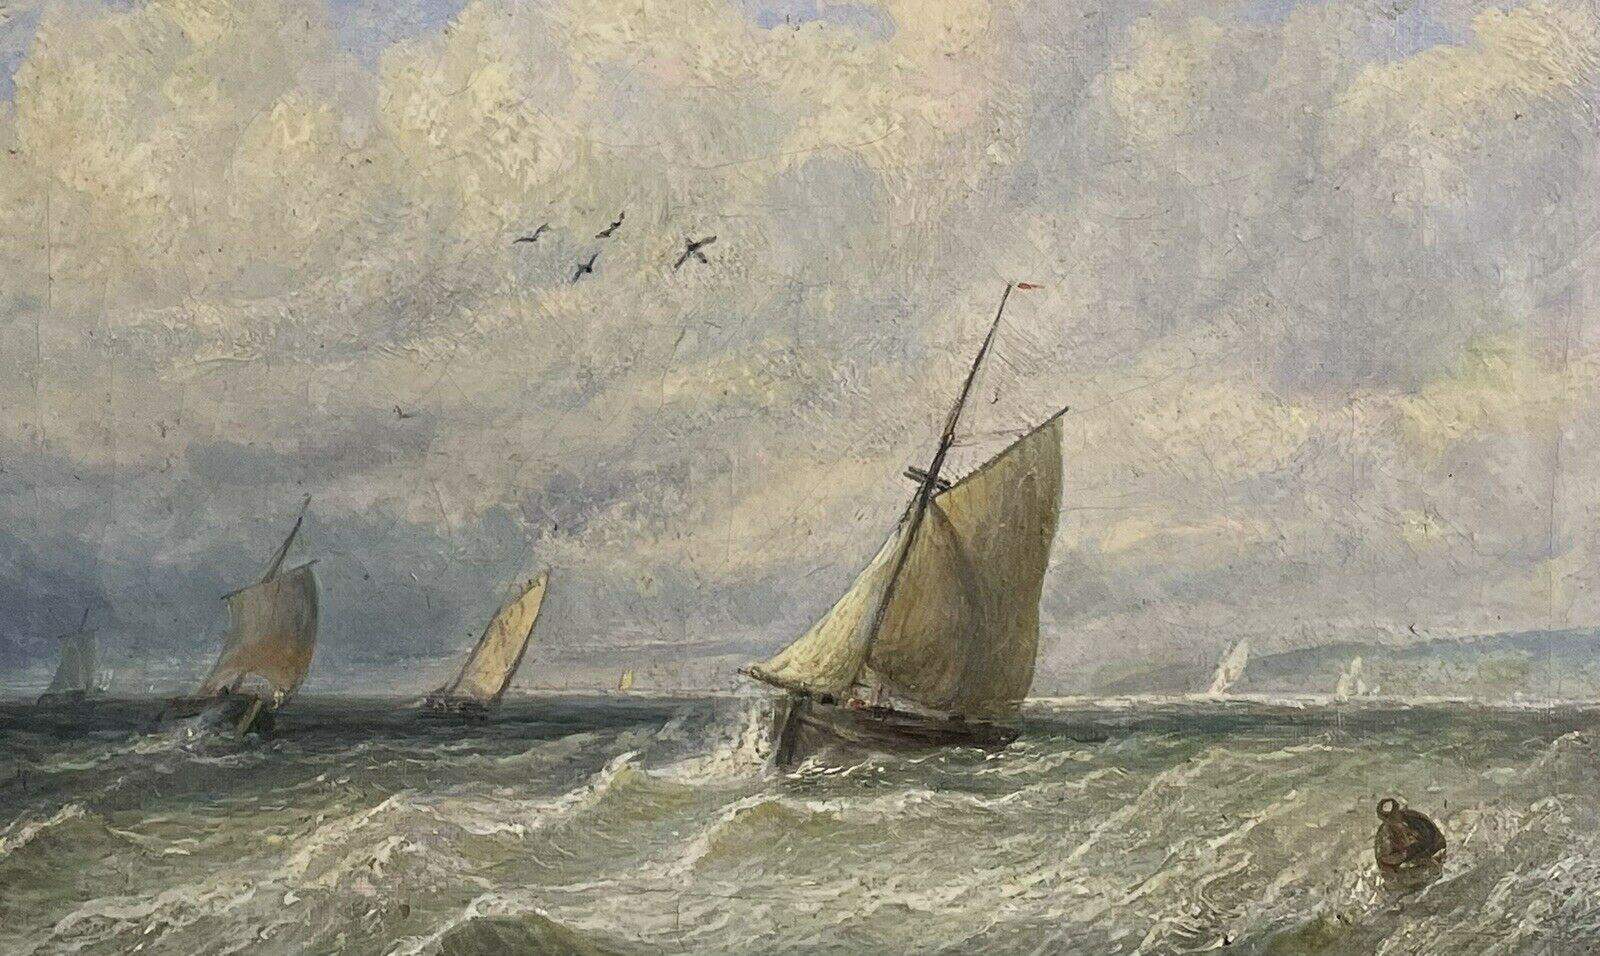 Artist/ School: English School, 19th century

Title: Fishing Boats at sea, with a distant coastline. 

Medium: signed oil painting on canvas, framed.

Size:

framed:   15.5  x  19.5 inches
canvas:   10 x 14  inches

Provenance: private collection,